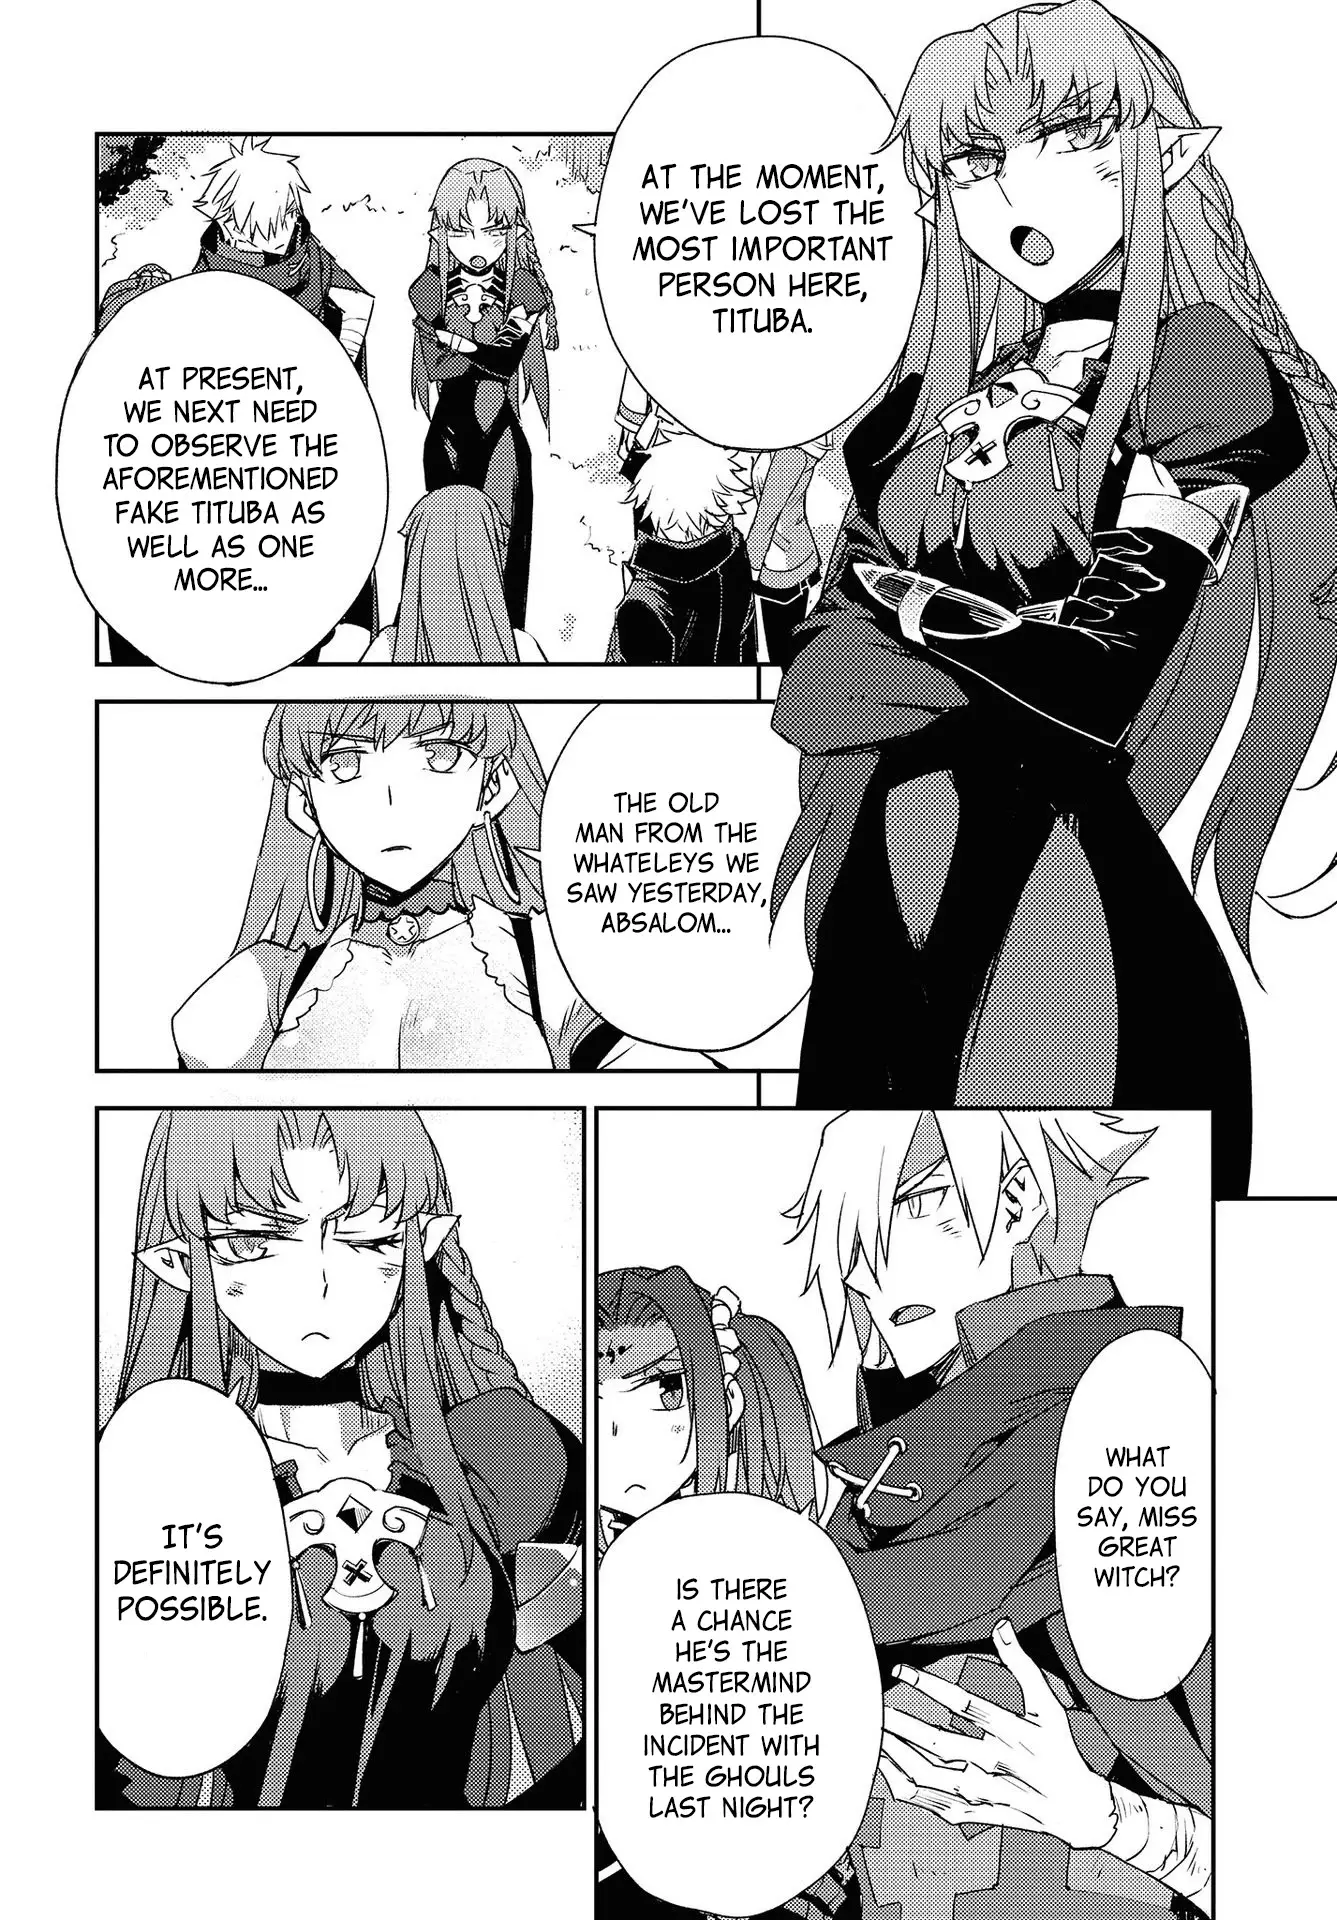 Fate/grand Order: Epic Of Remnant - Subspecies Singularity Iv: Taboo Advent Salem: Salem Of Heresy - 20 page 12-3483799c